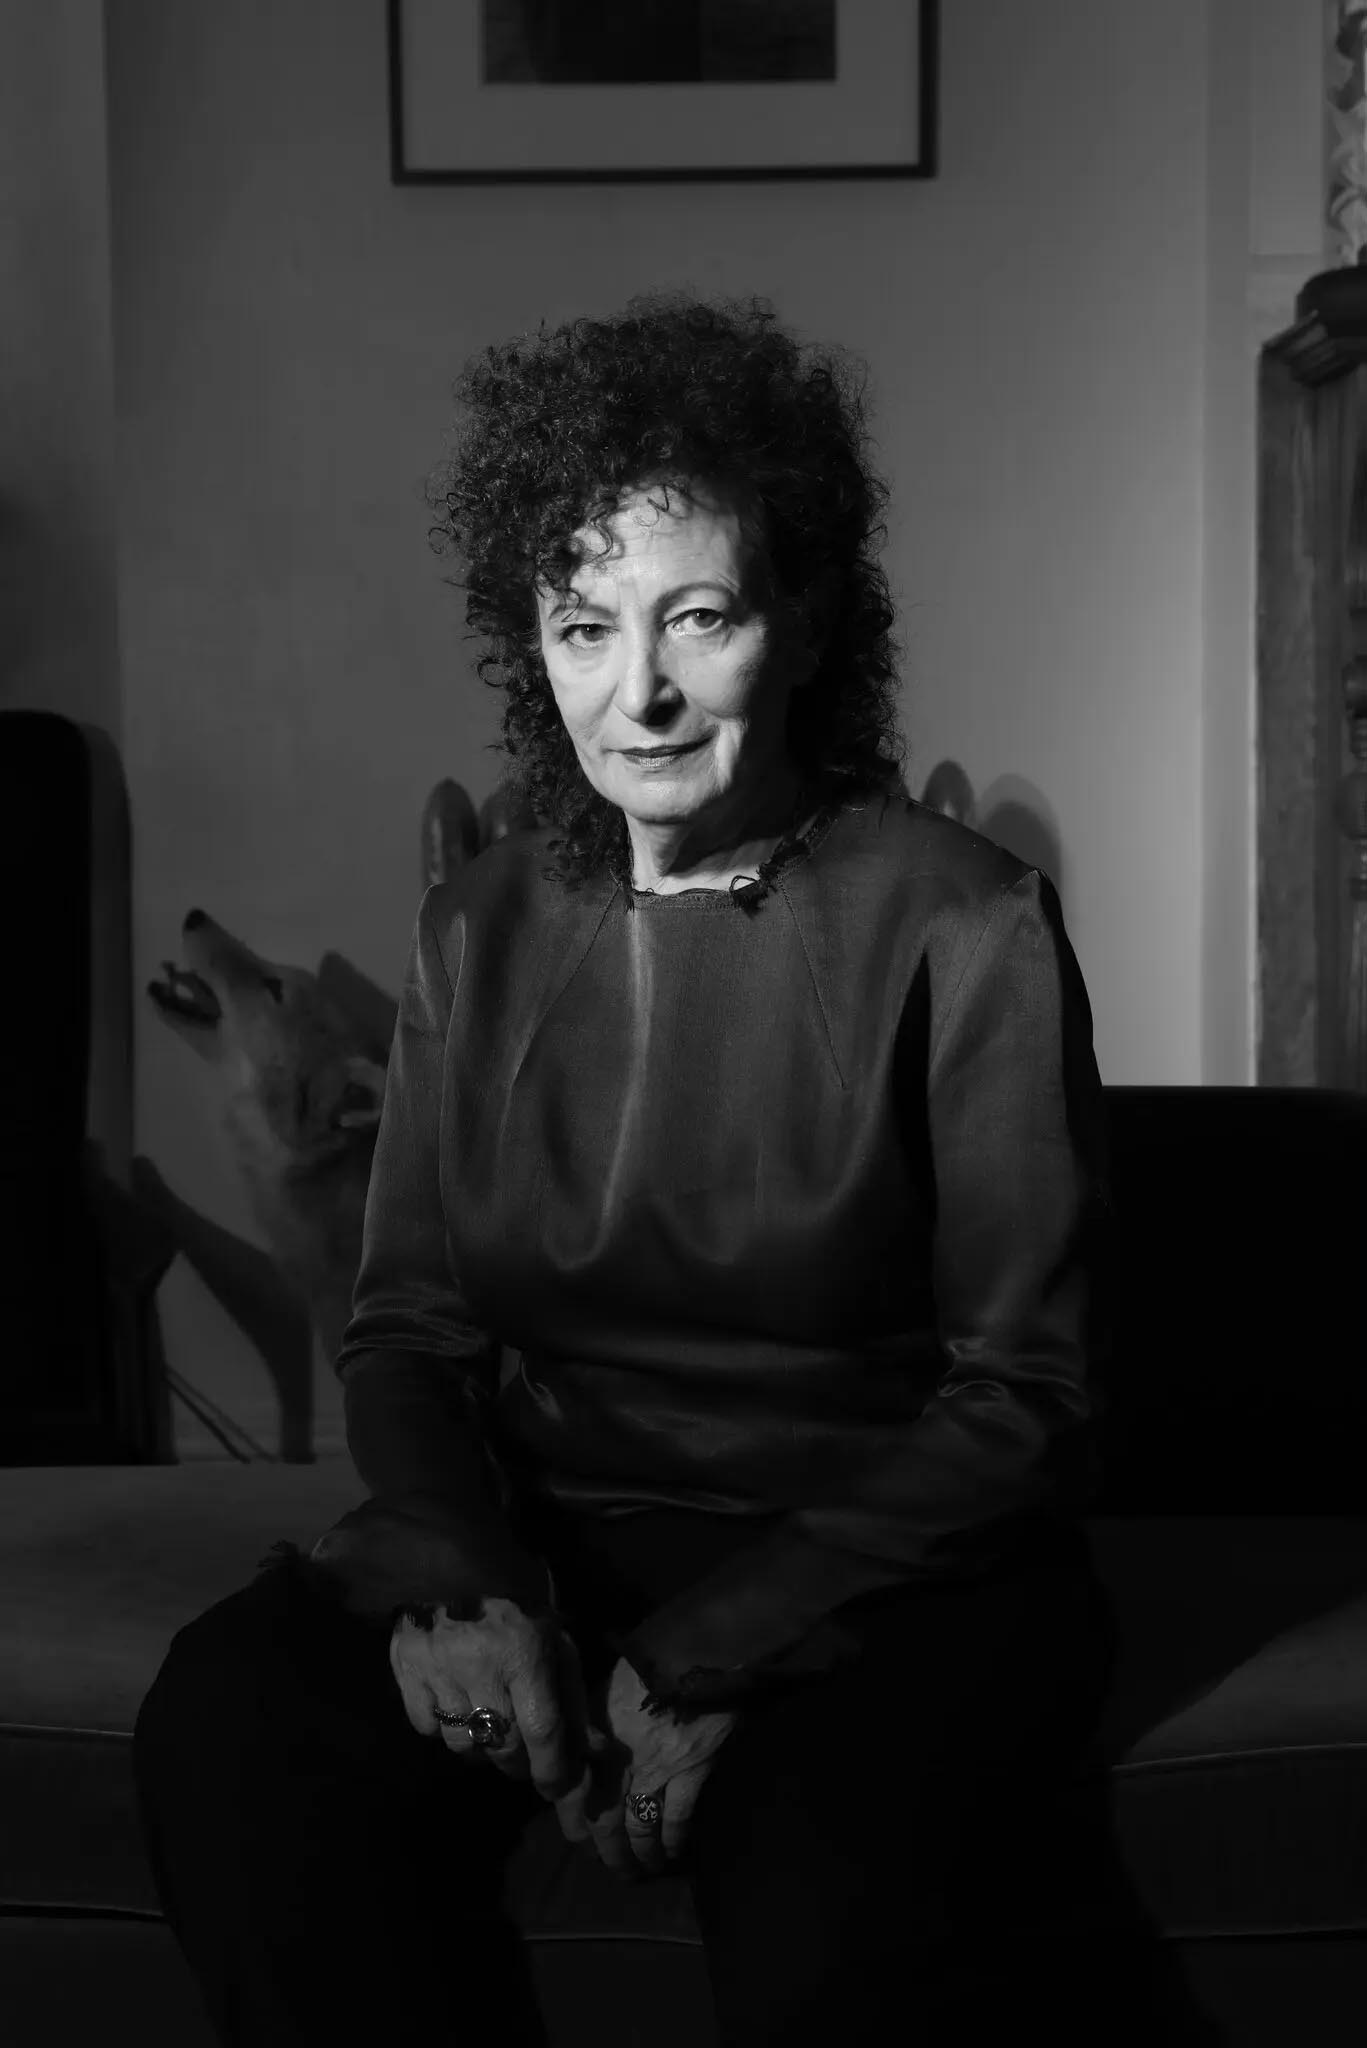 Image: Nan Goldin (Copyright Thea Traff for the NY Times)